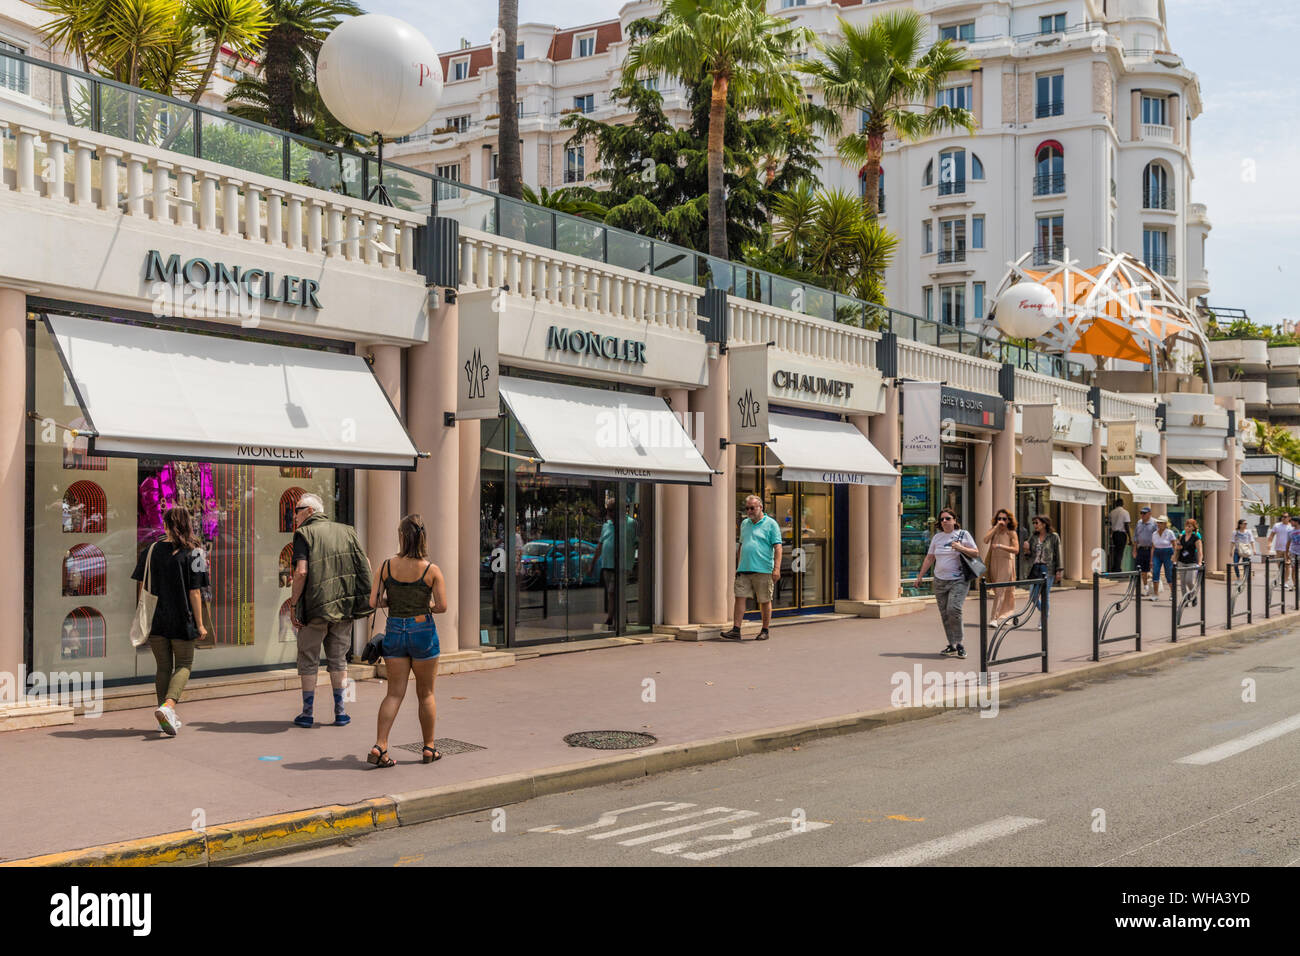 Street scene in Cannes, Alpes Maritimes, Cote d'Azur, Provence, French Riviera, France, Mediterranean, Europe Stock Photo